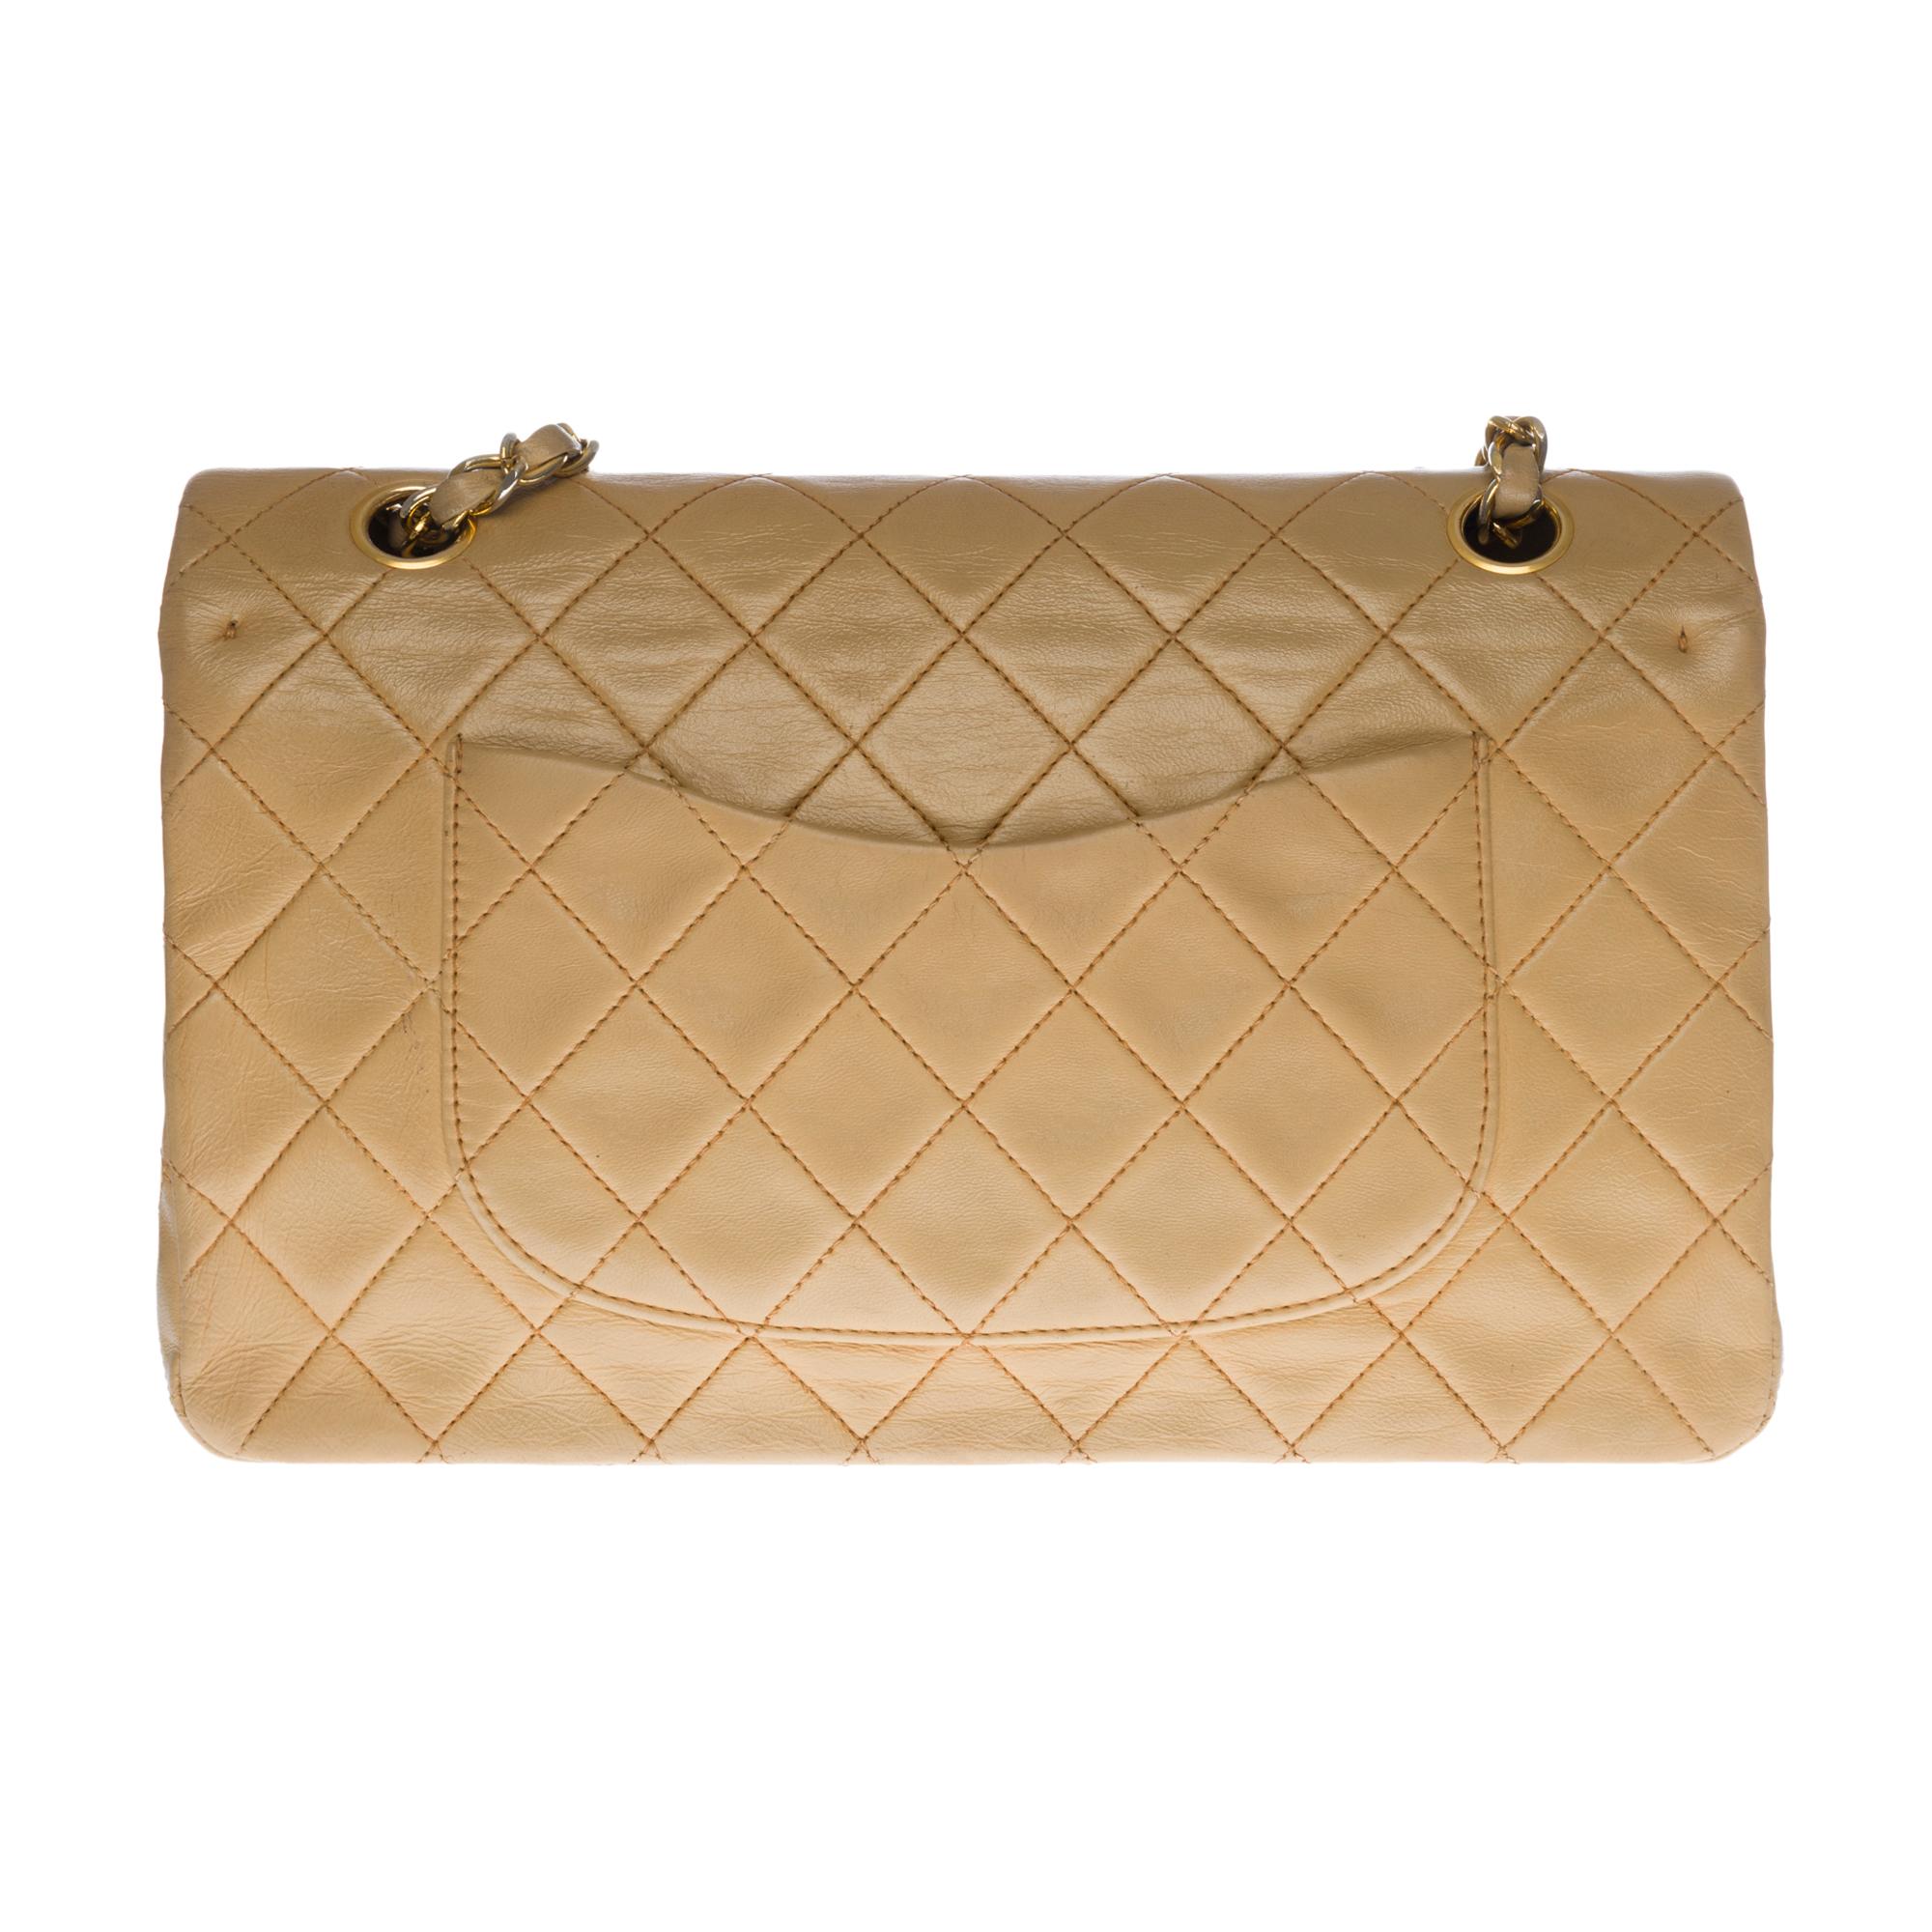 Beautiful Chanel Timeless/Classique handbag with double flap in beige quilted lambskin leather, gold-tone metal hardware, a golden metal chain handle intertwined with beige leather allowing a hand, shoulder and shoulder strap
Closure with gold metal